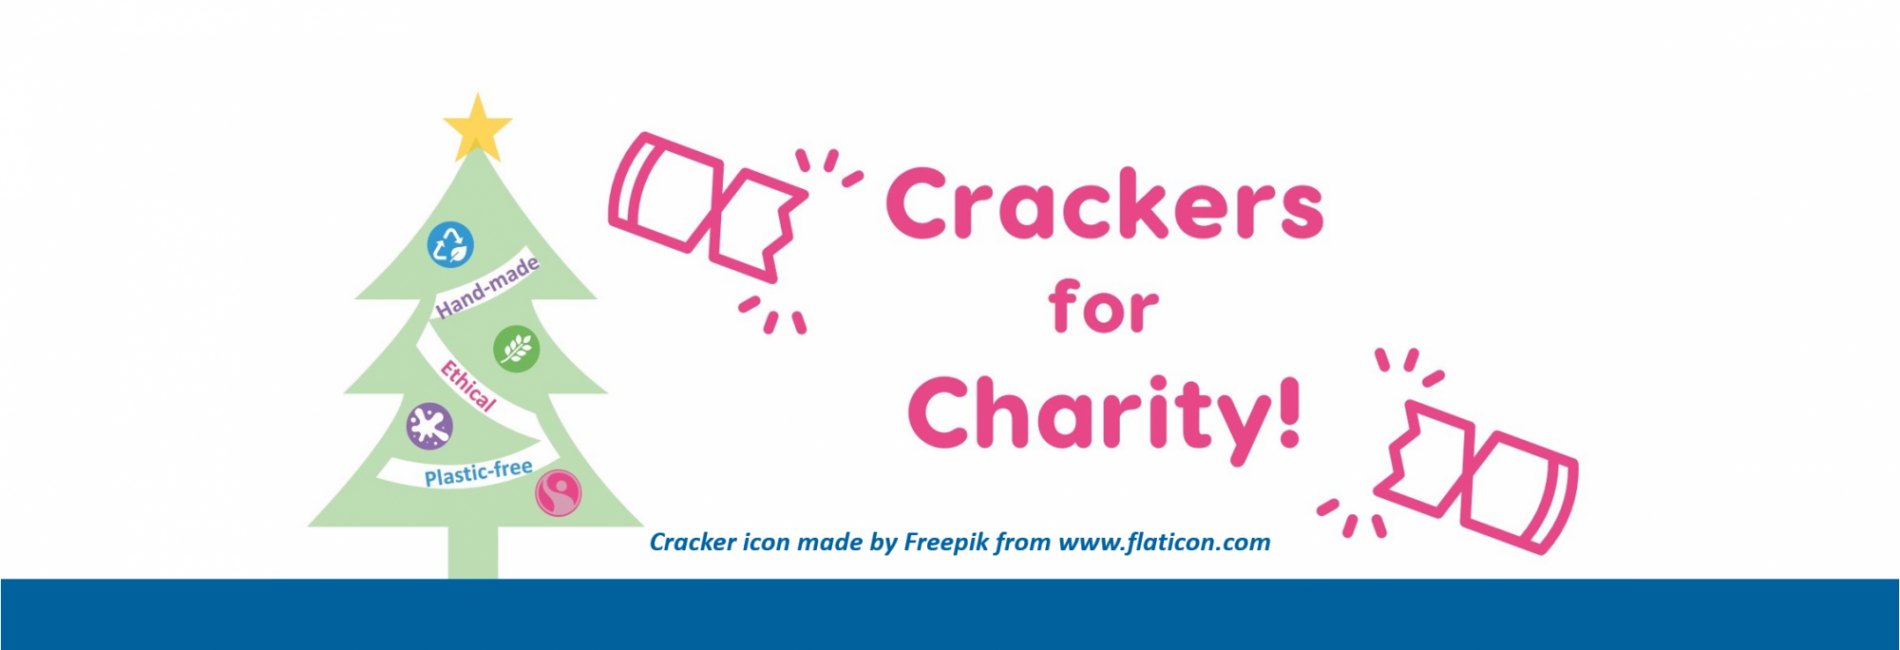 Go Crackers for Charity!